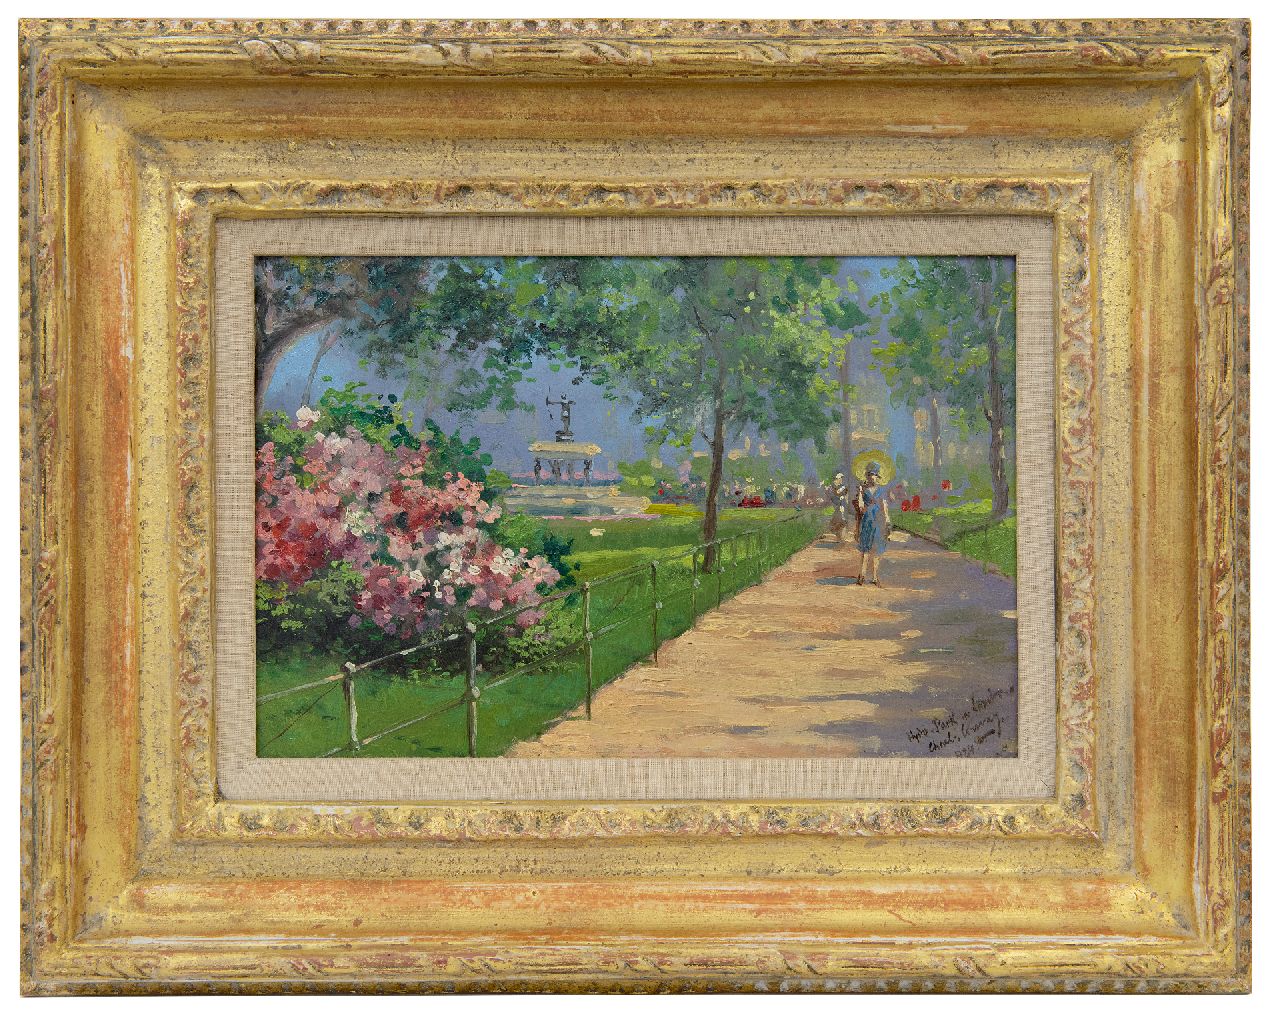 Conway II Ch.  | Charles Conway II, Hyde Park, London, oil on board 19.6 x 29.5 cm, signed l.r. and dated 1924